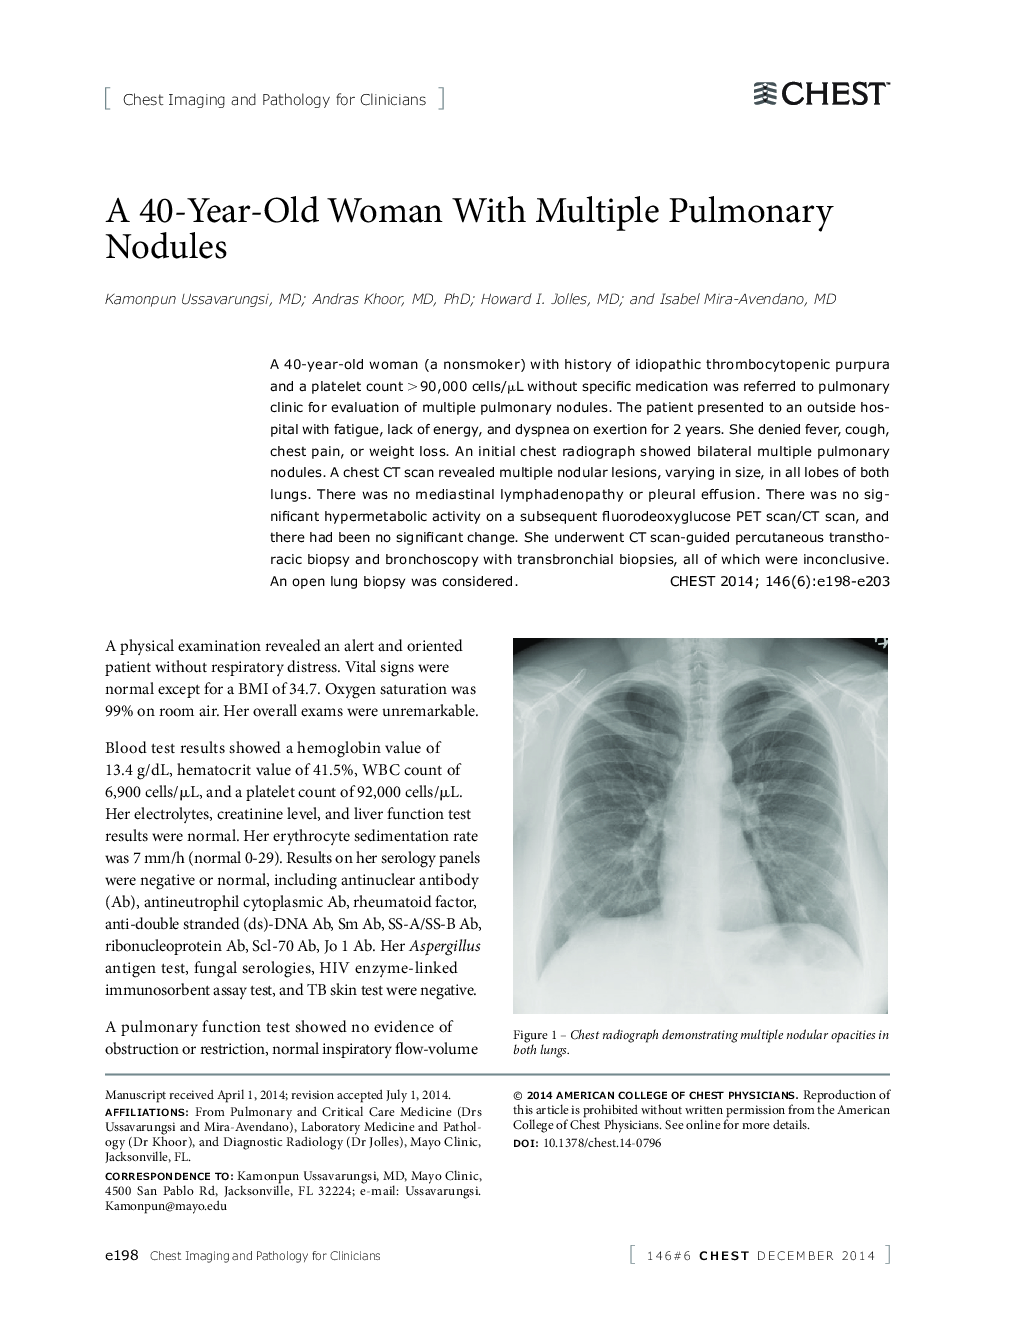 Chest Imaging and Pathology for CliniciansA 40-Year-Old Woman With Multiple Pulmonary Nodules